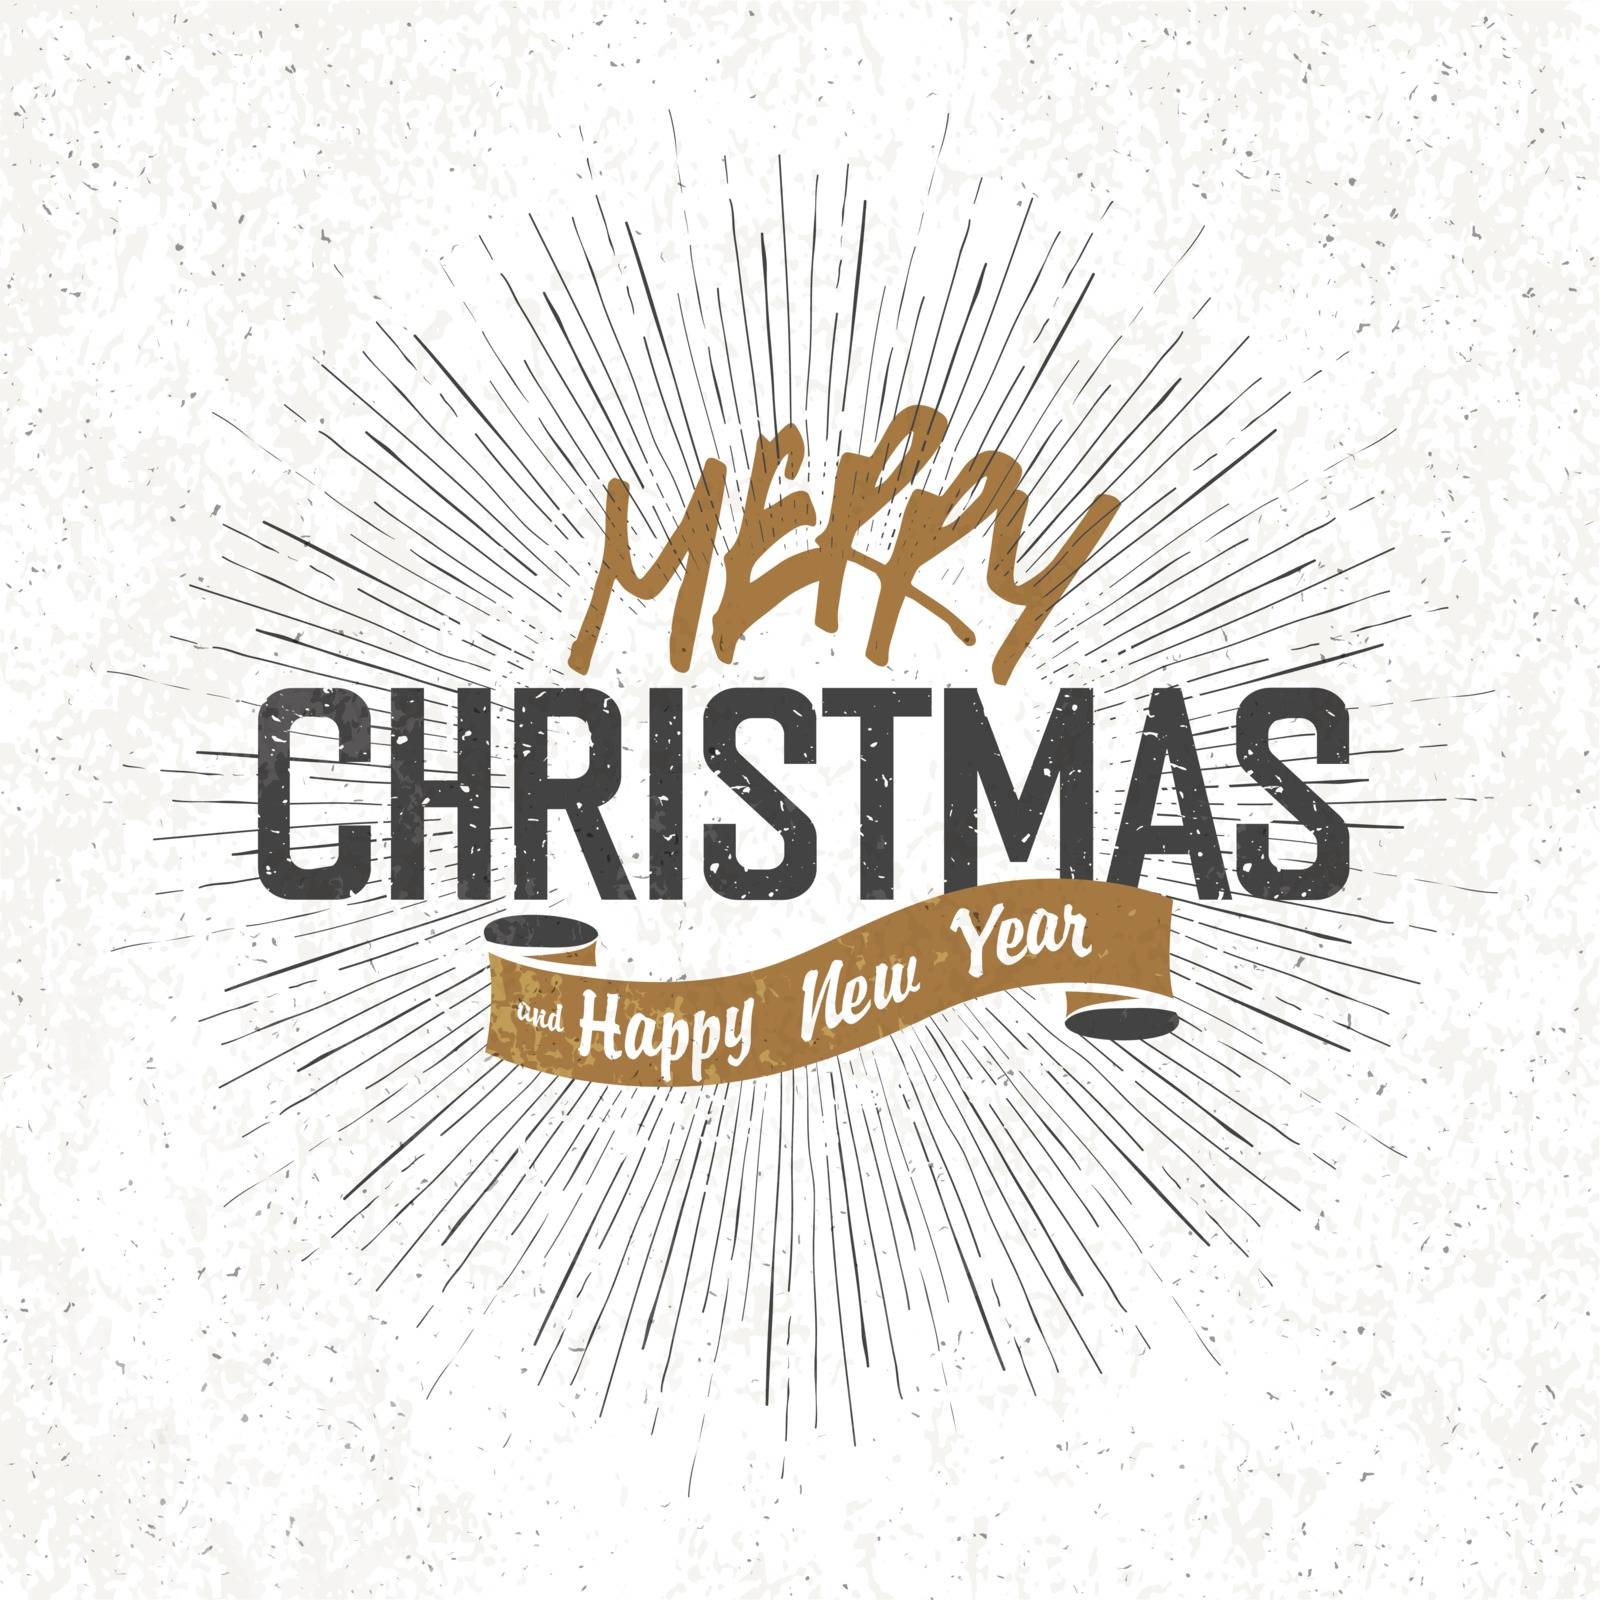 Merry Christmas Vintage Monochrome Lettering by pashabo